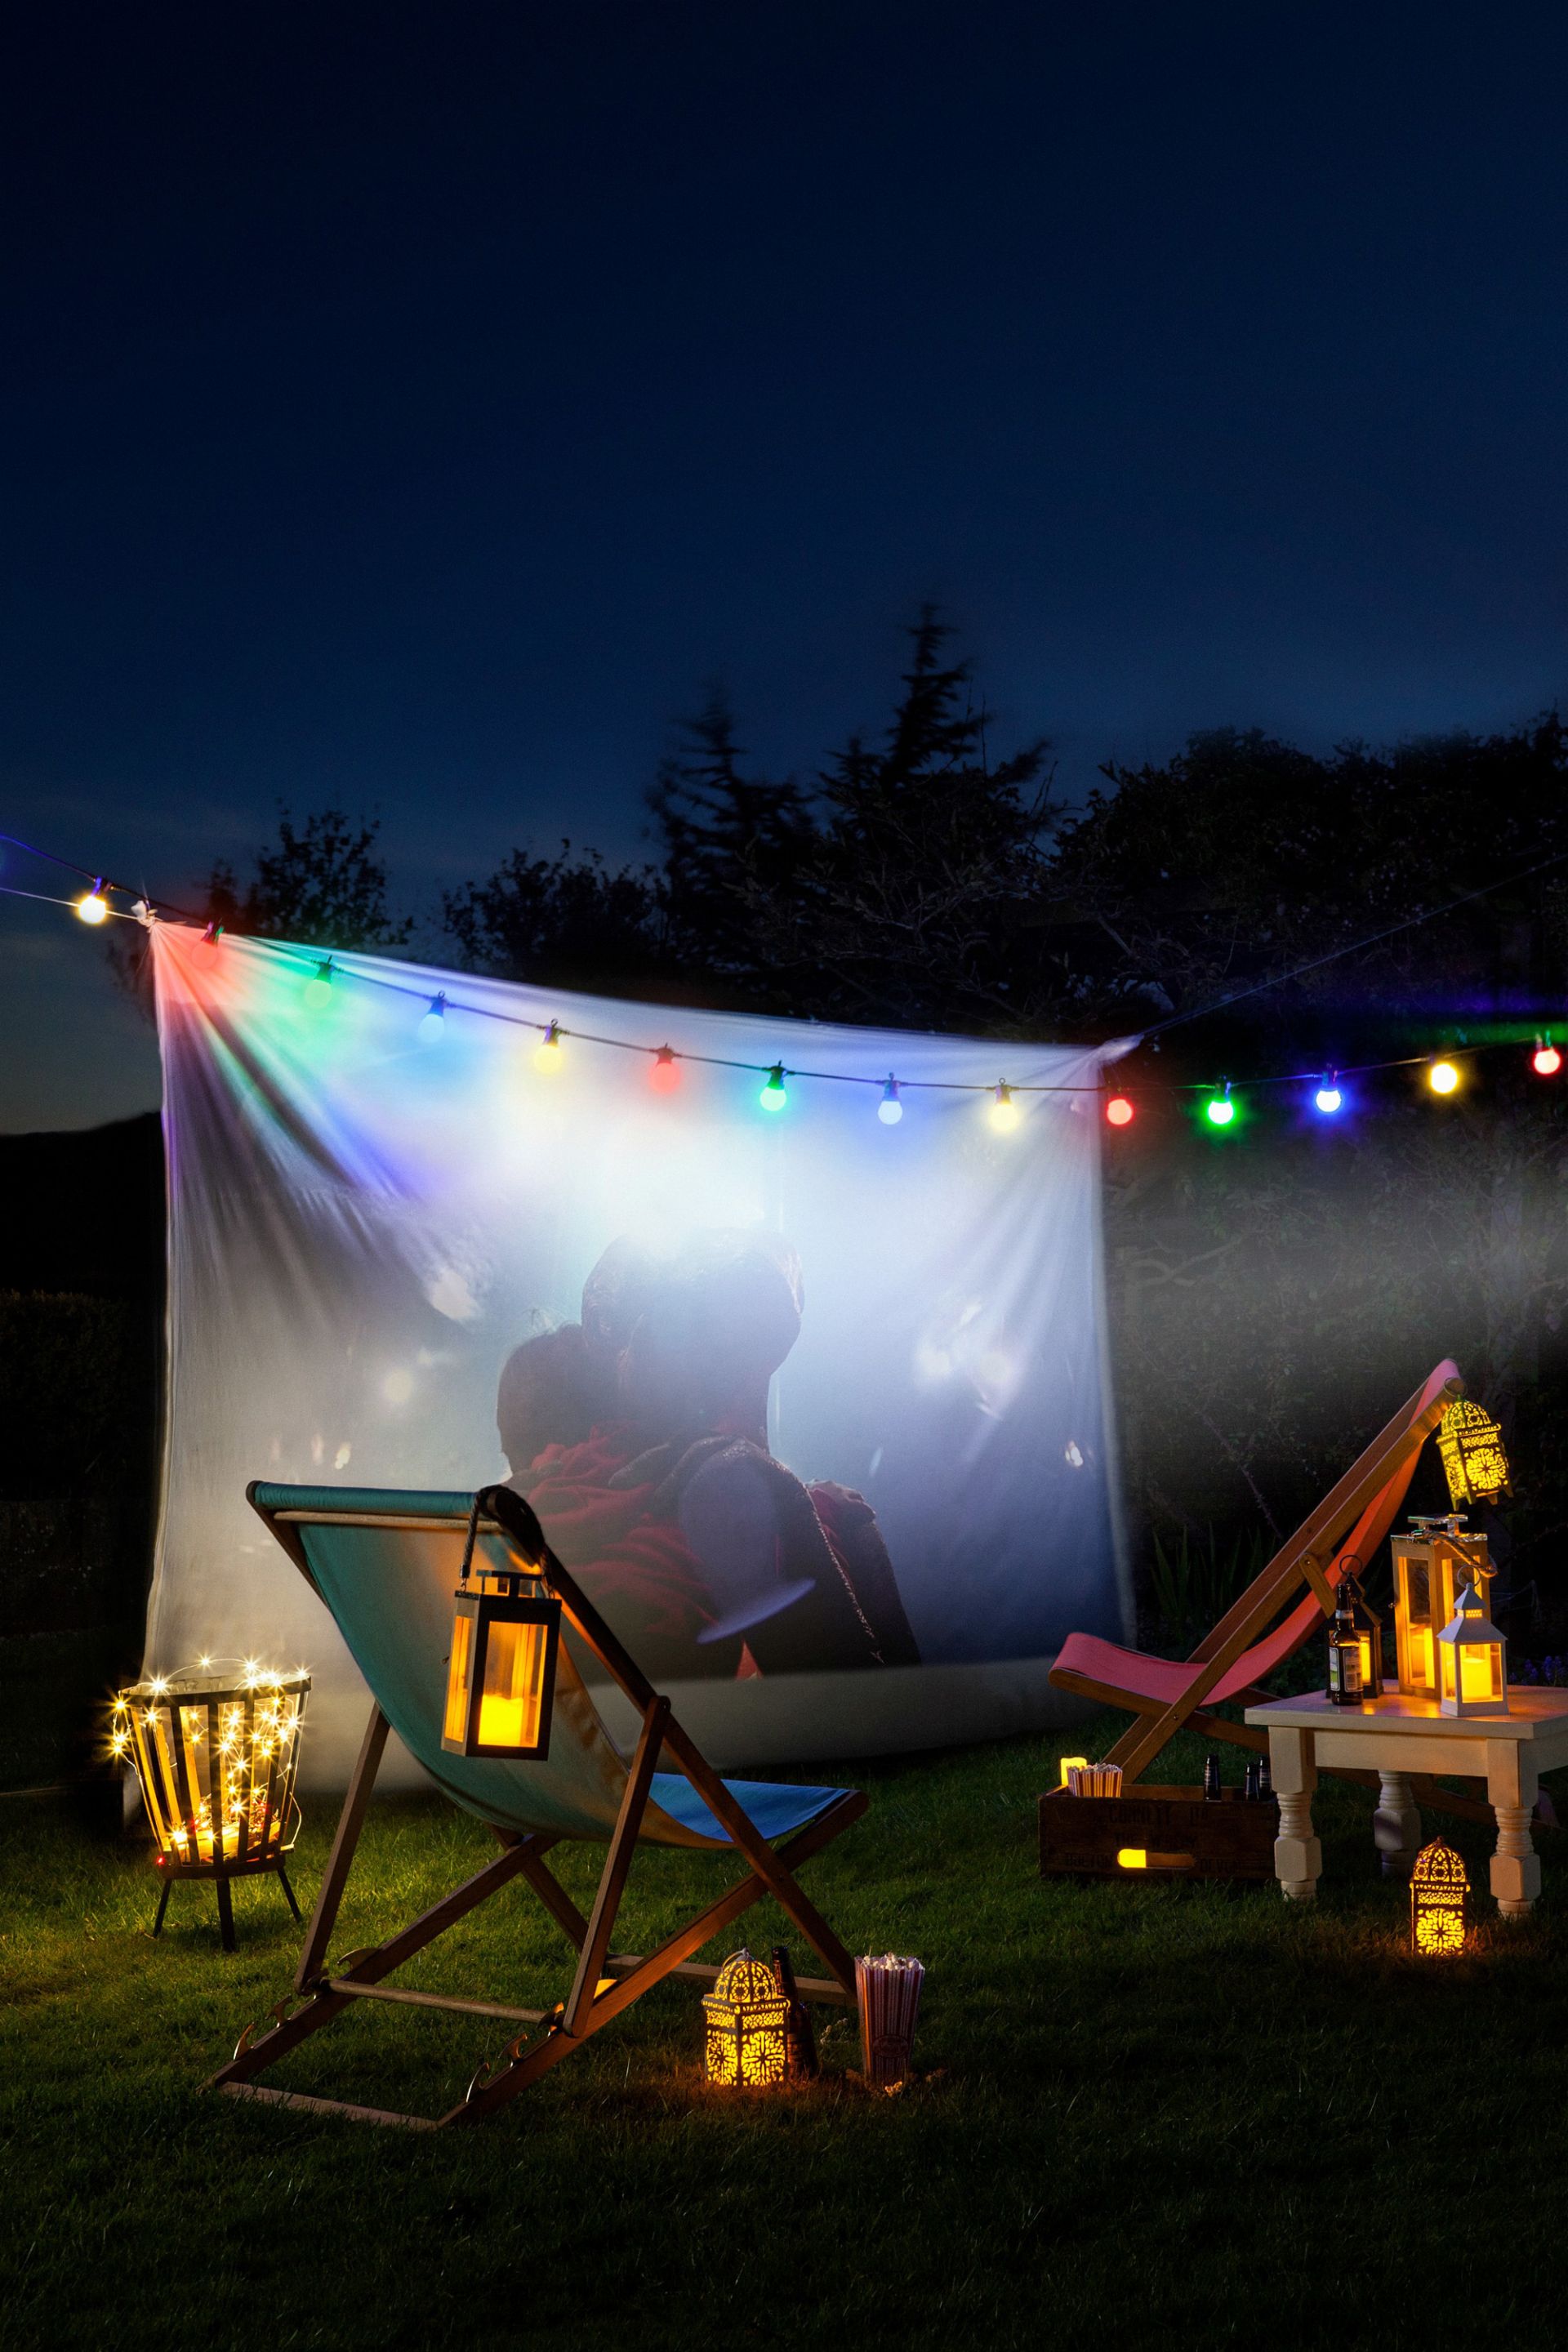 <p>                     If you're looking for more garden activities for kids that all the family can enjoy, then nothing beats snuggling up together for a film night. Moving it outside to the garden will turn the experience into something to remember. Easy to set up, all you need is a white sheet thrown over a washing line and the best outdoor projector.                    </p>                                      <p>                     Set the scene with lots of magical garden lighting ideas. Multi-colored festoon lights add a special touch that children will love. Dot around some lanterns too for a fairytale vibe, then pile up the blankets and throws. And don't forget the popcorn!                   </p>